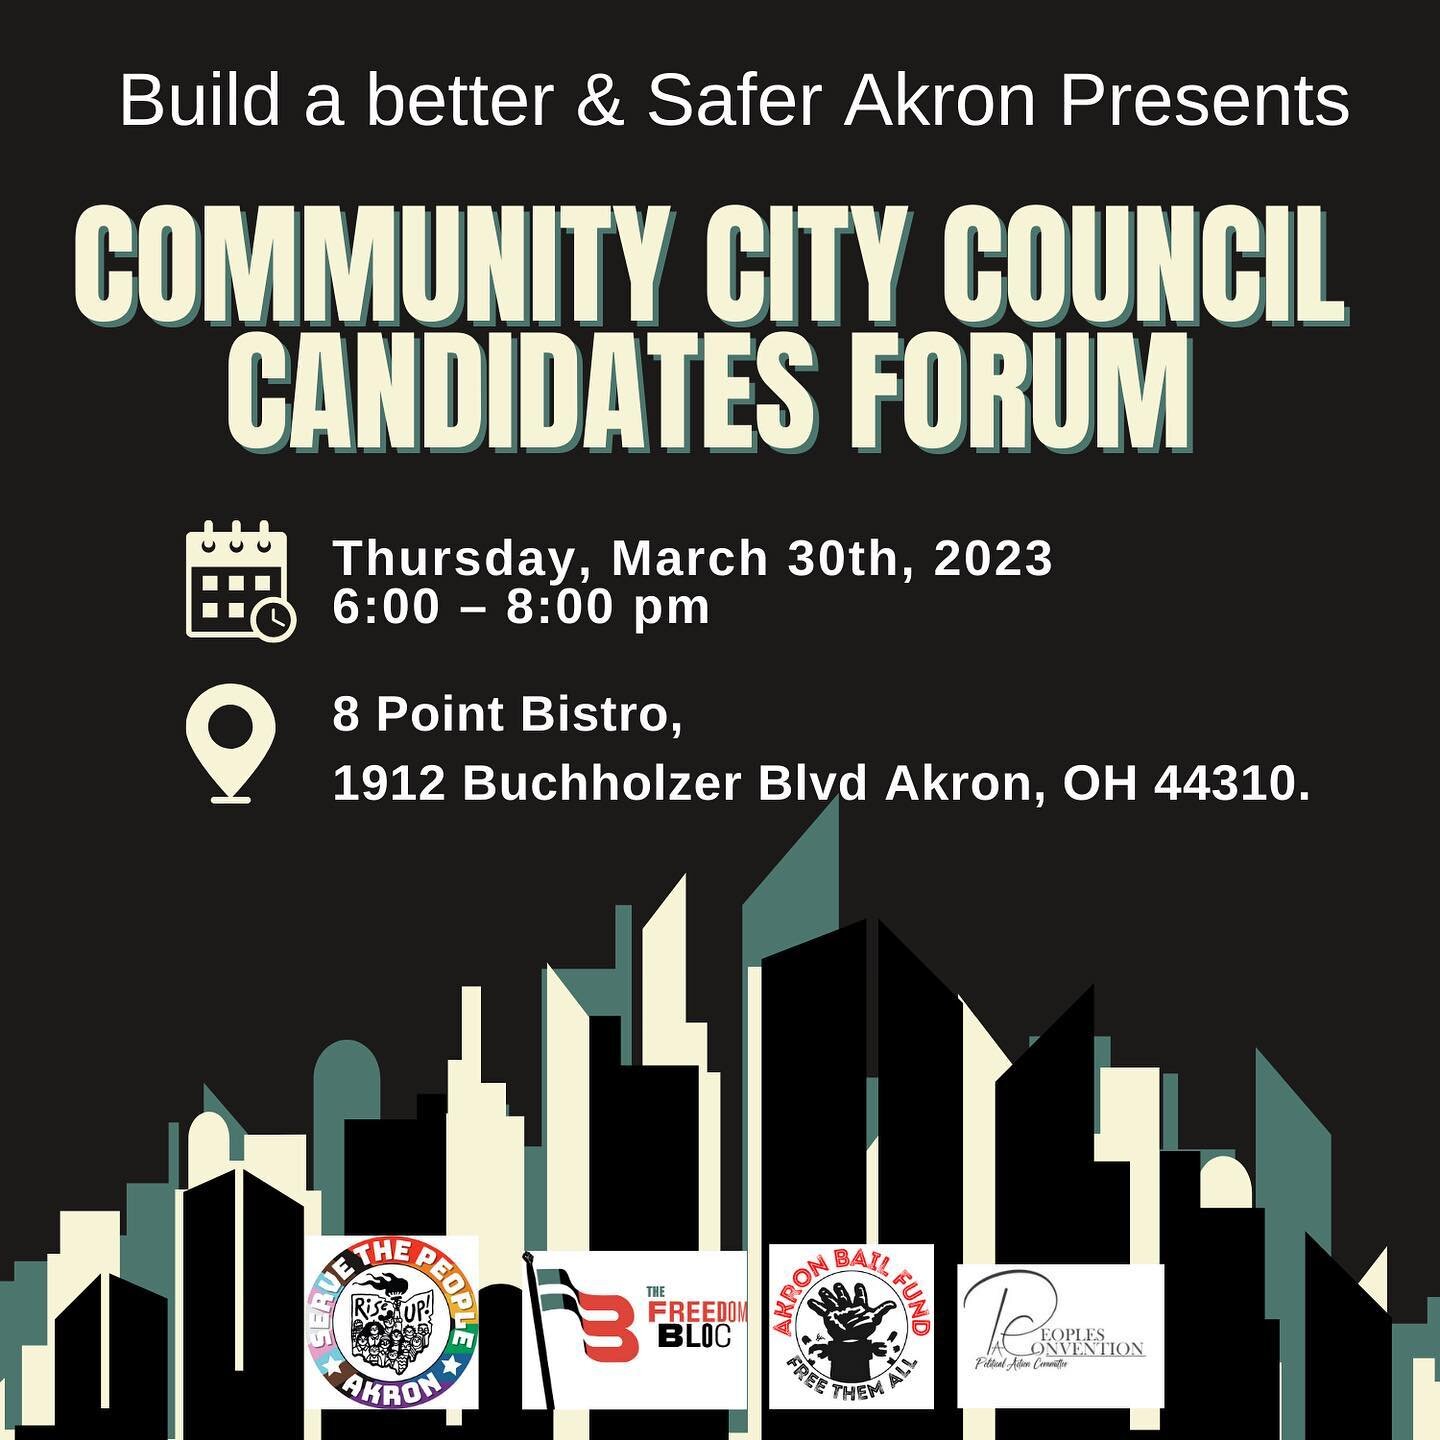 Don't miss out on the opportunity to learn more about the candidates running for Akron city council and their vision for our community! Join us on Thursday, March 30th, 2023 for the Community City Council Candidates Forum. Engage with the candidates,